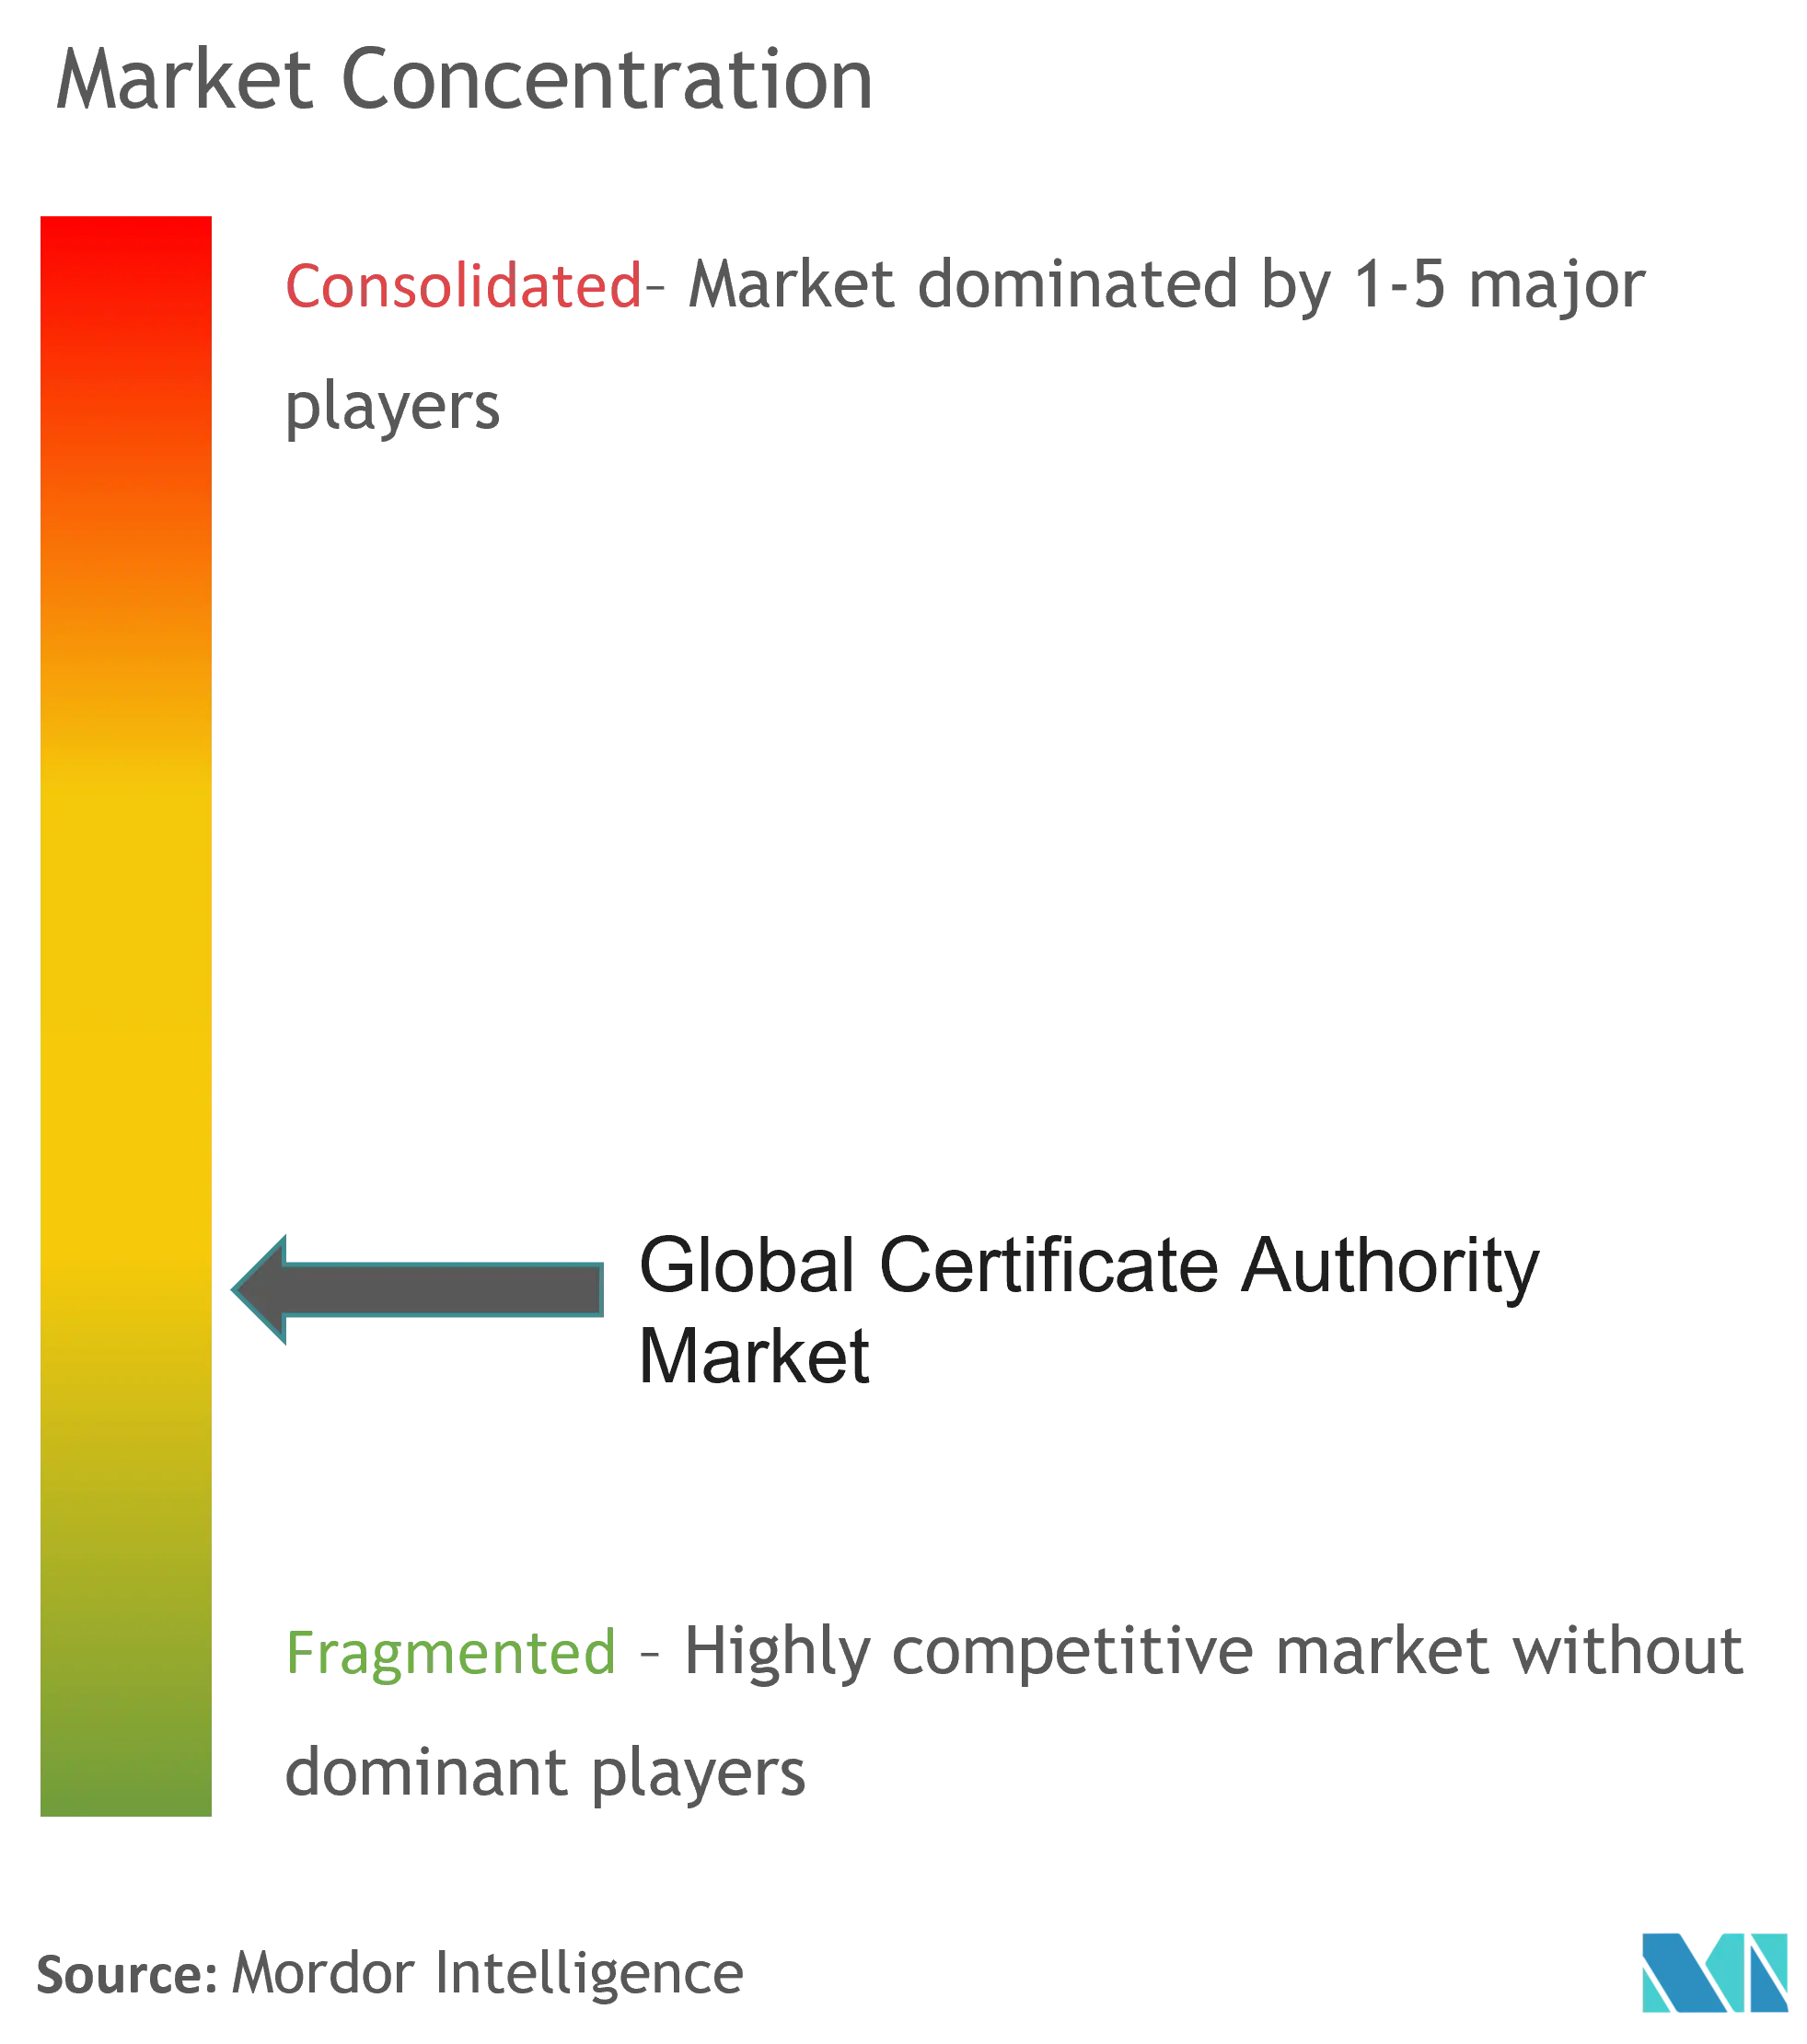 Certificate Authority Market Concentration